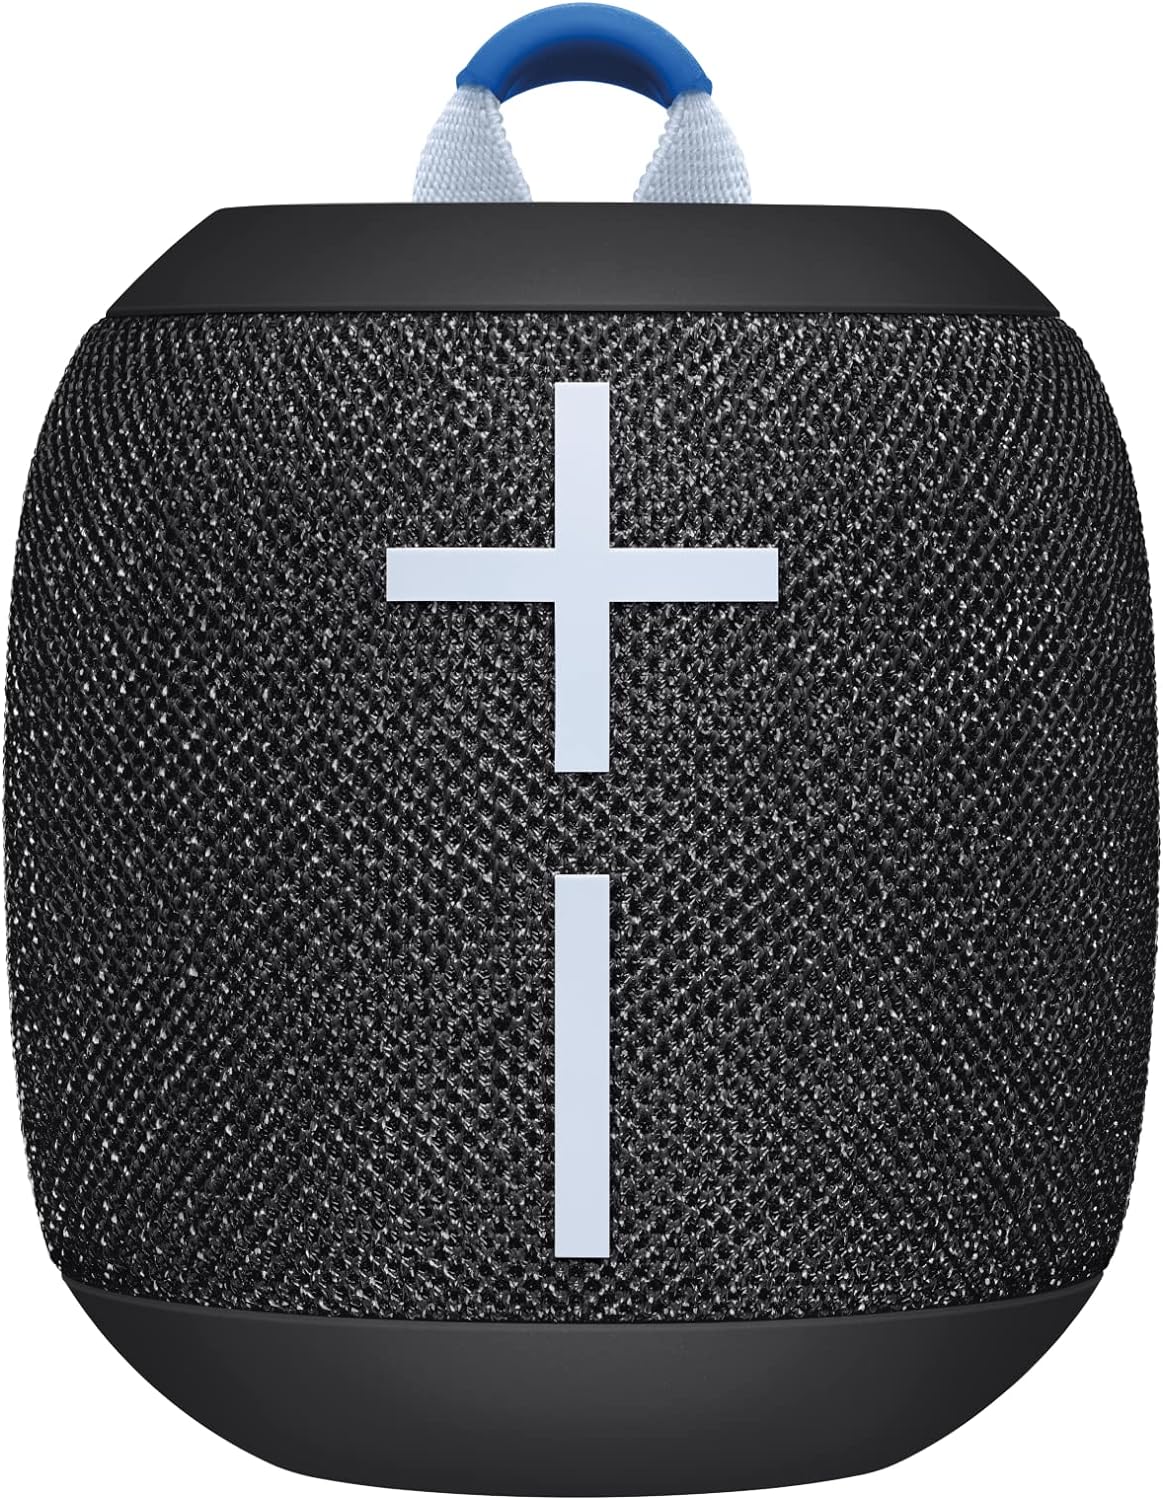 Review of Ultimate Ears WONDERBOOM 3, Small Portable Wireless Bluetooth Speaker - Active Black